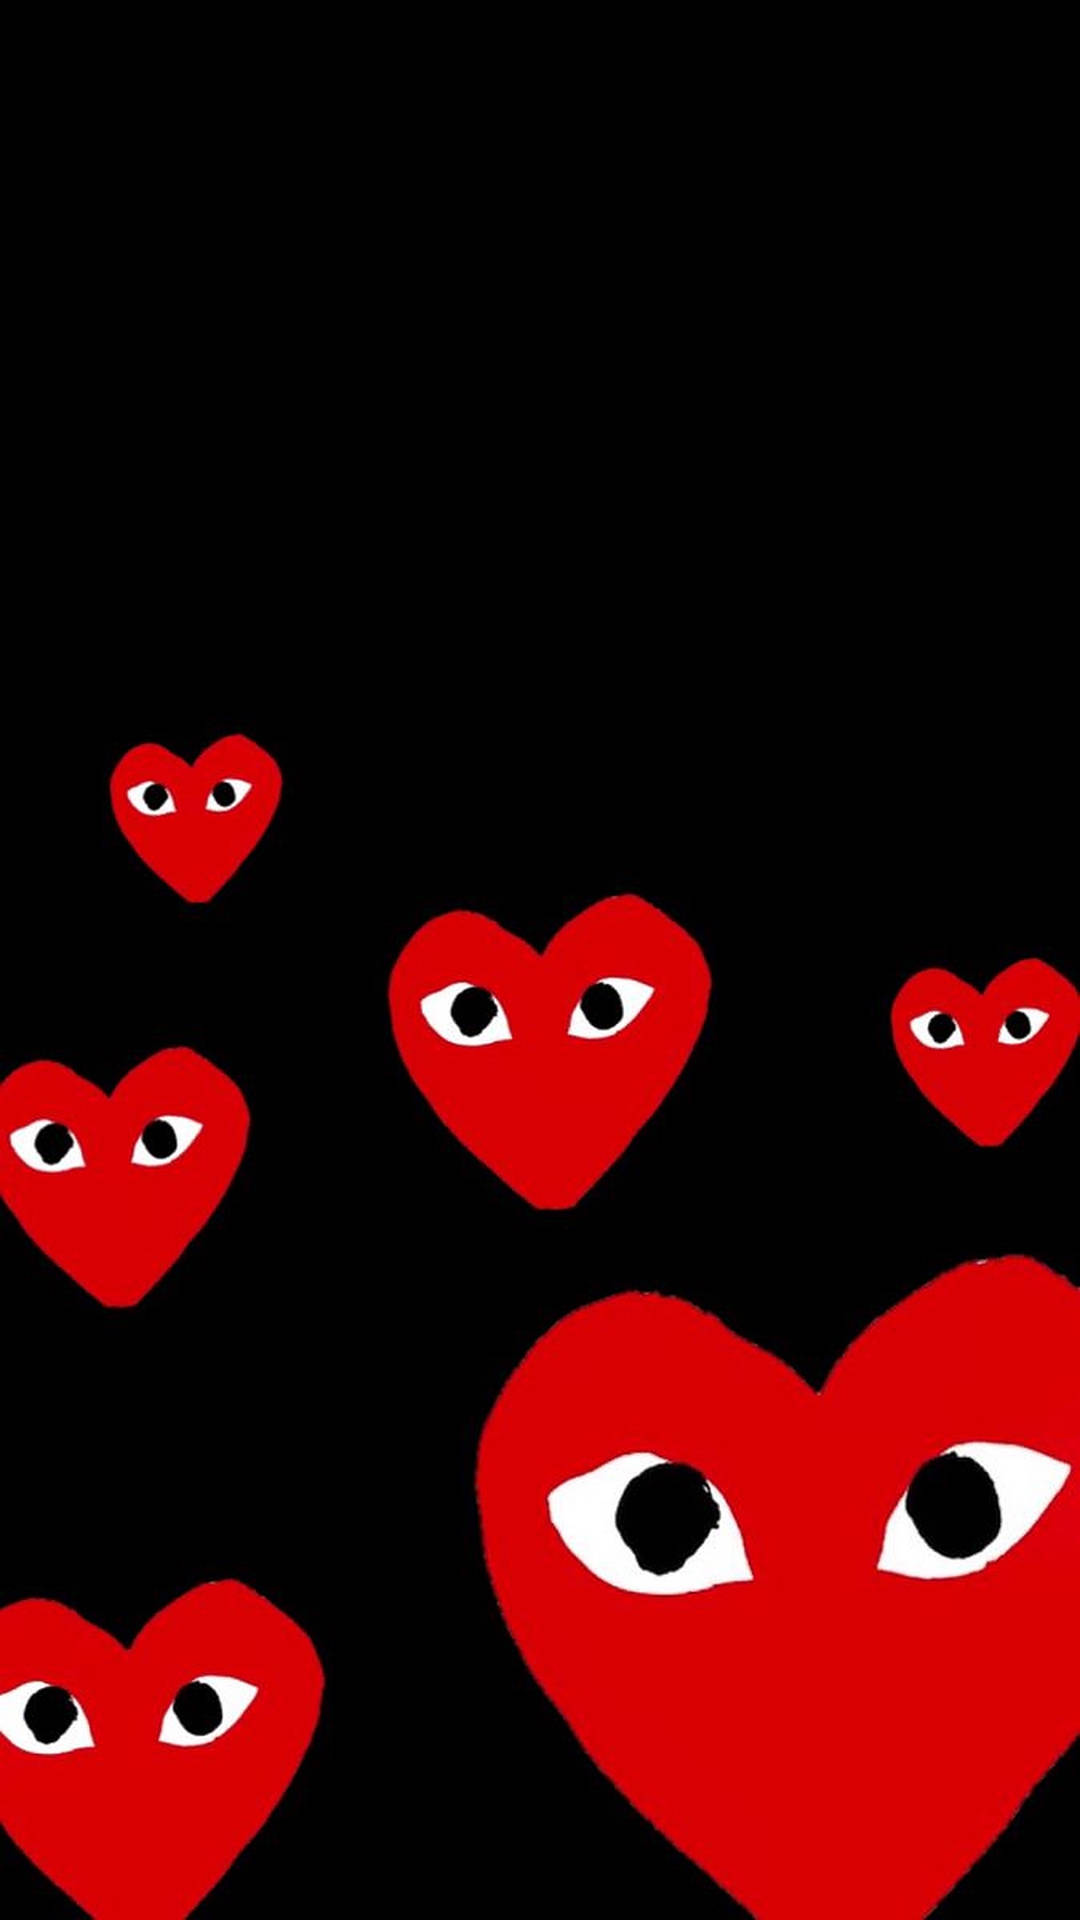 Cdg Hearts Pattern Background